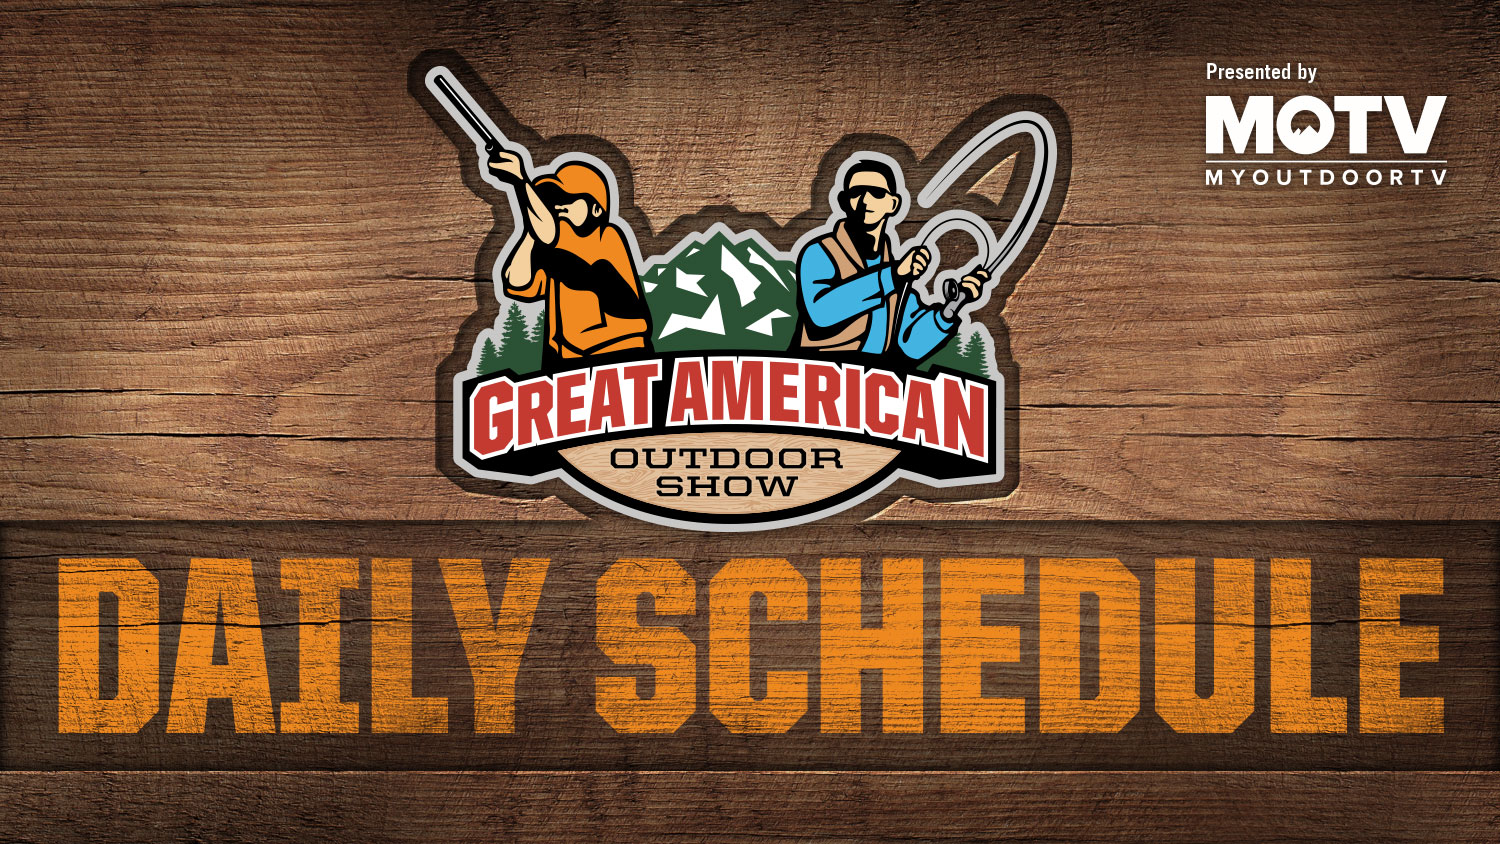 Great American Outdoor Show: Day 6 Schedule 